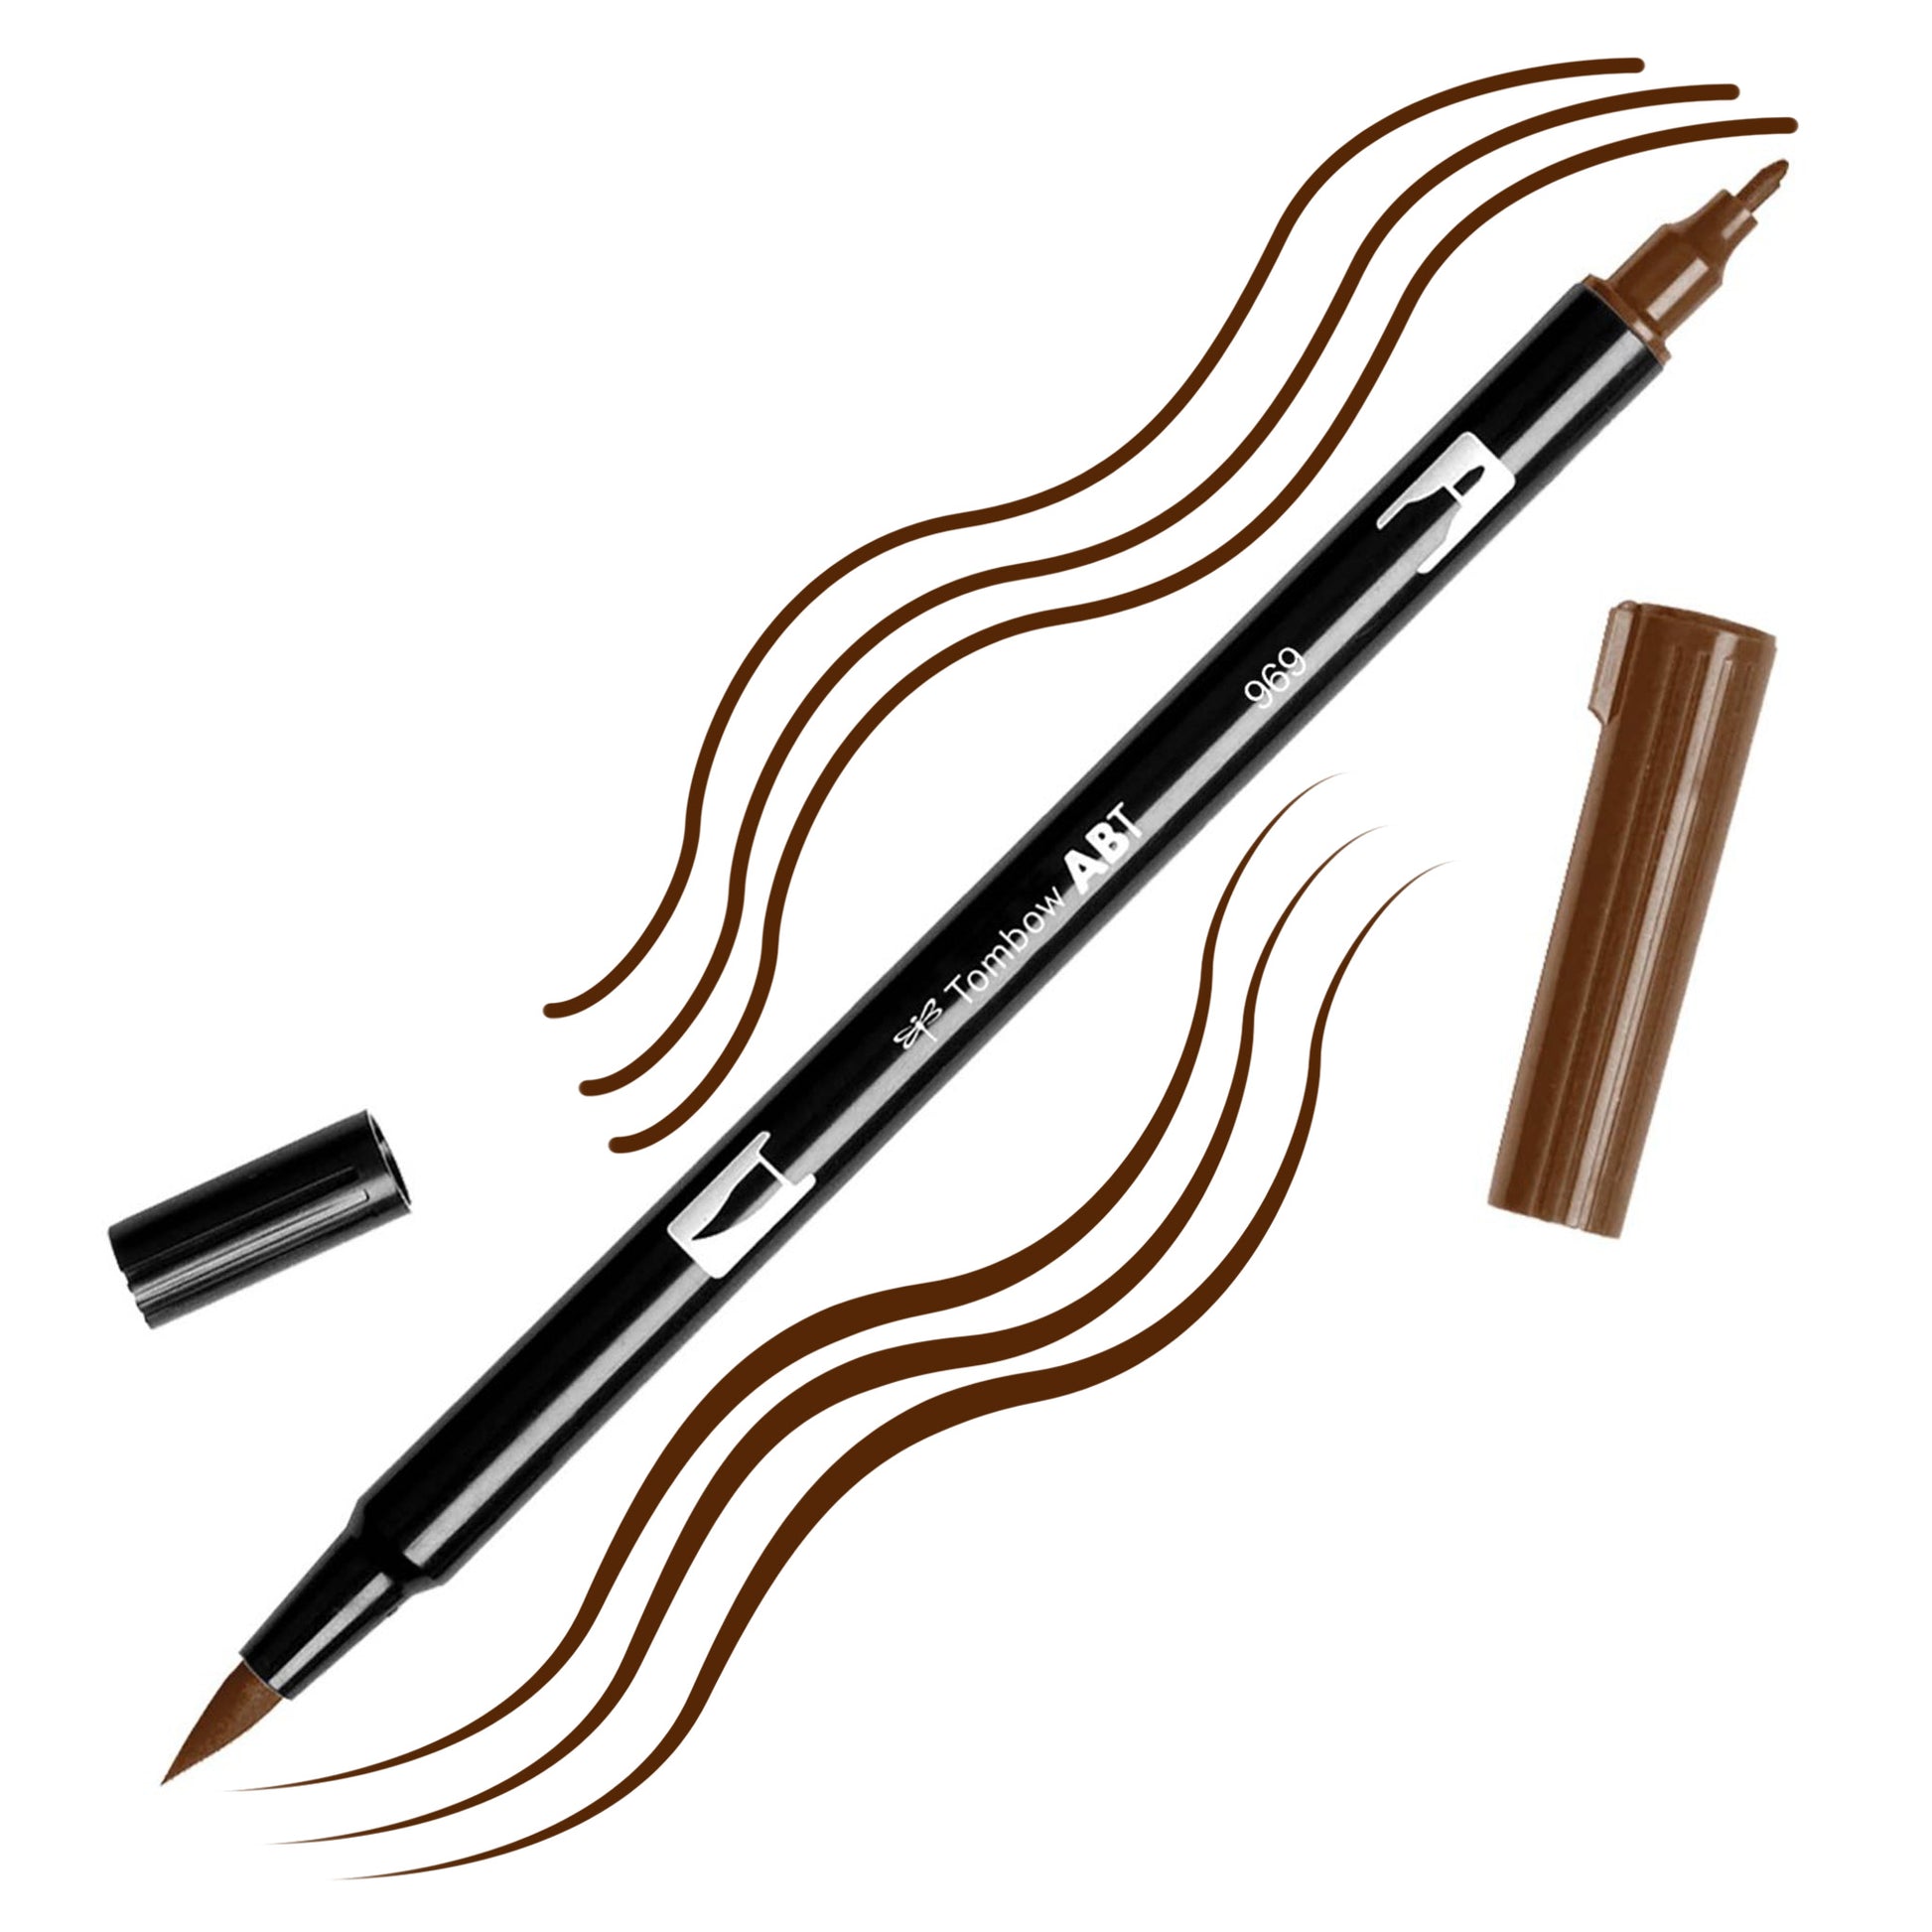 Chocolate Tombow double-headed brush-pen with a flexible nylon fiber brush tip and a fine tip against a white background with Chocolate strokes